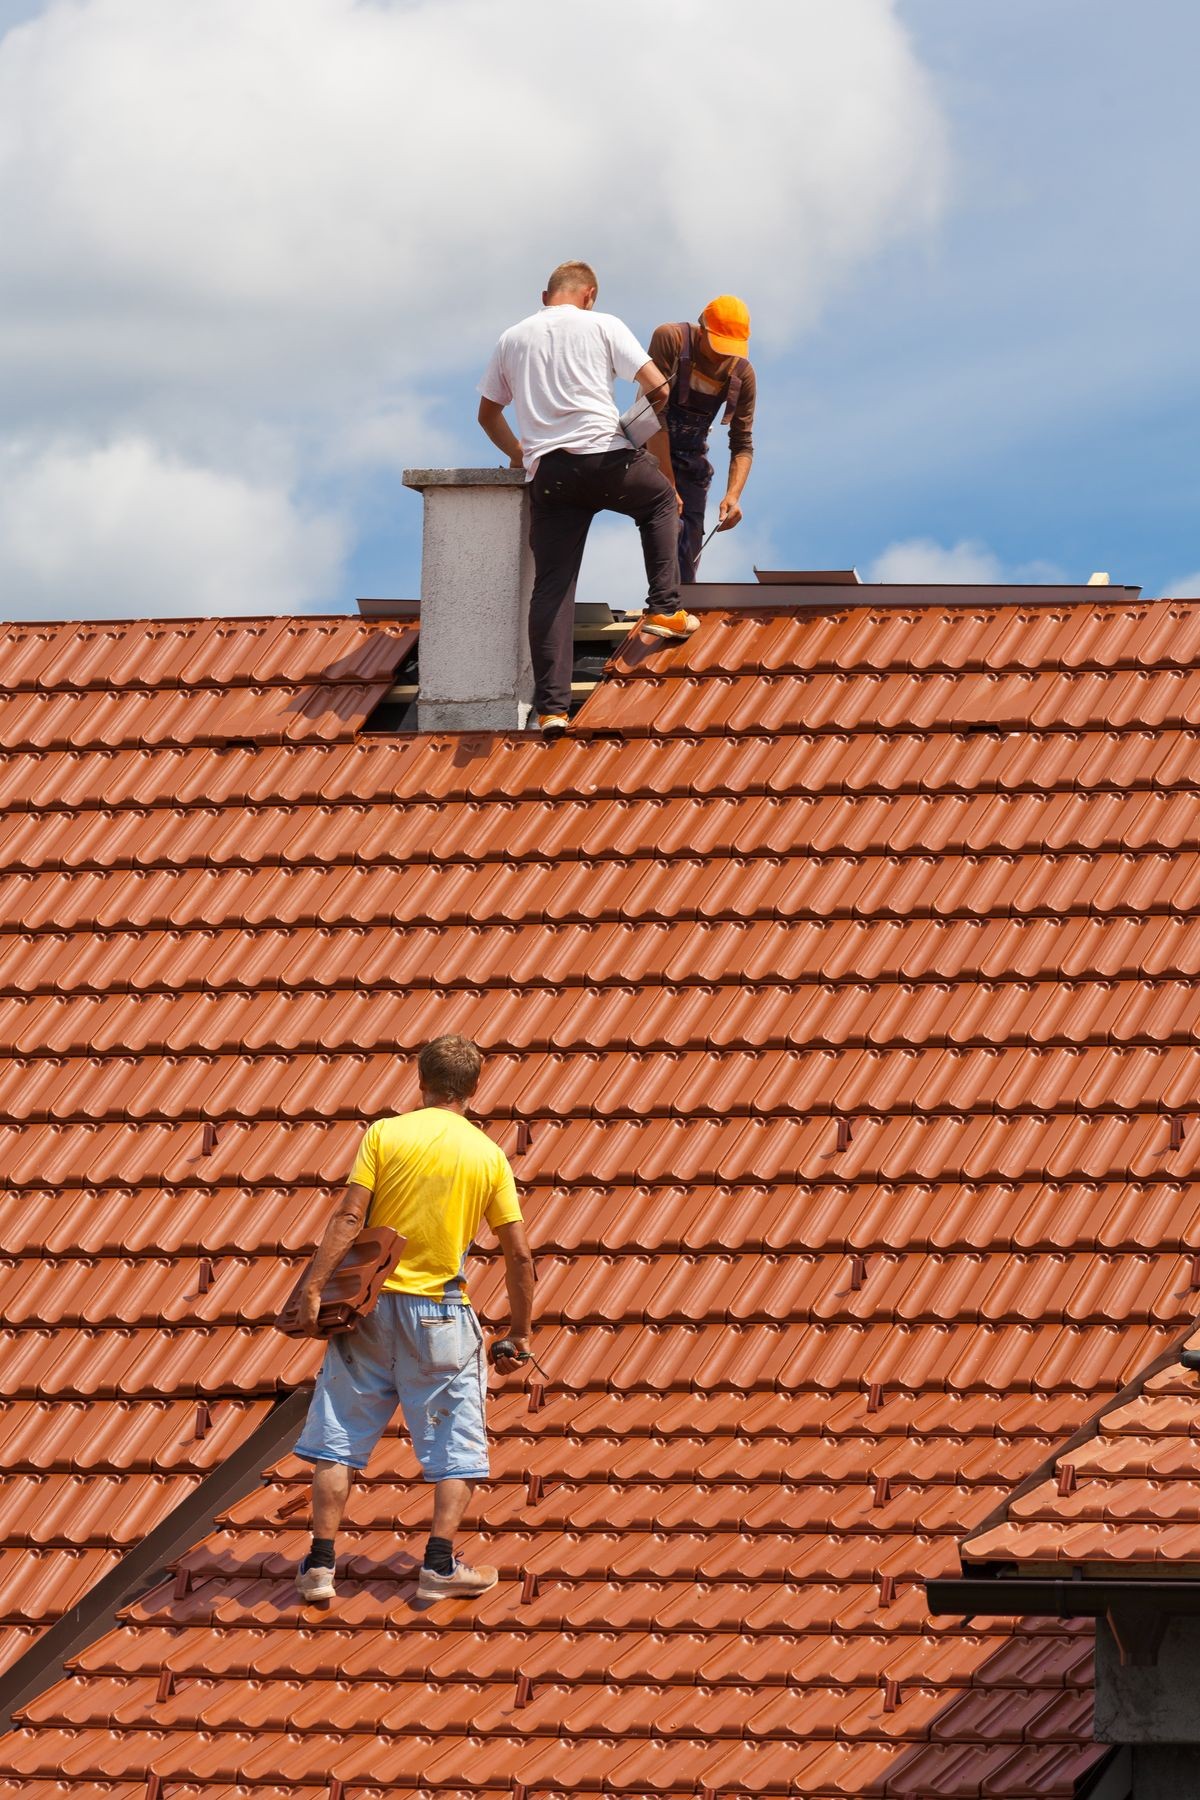 Men working on the roof of a building